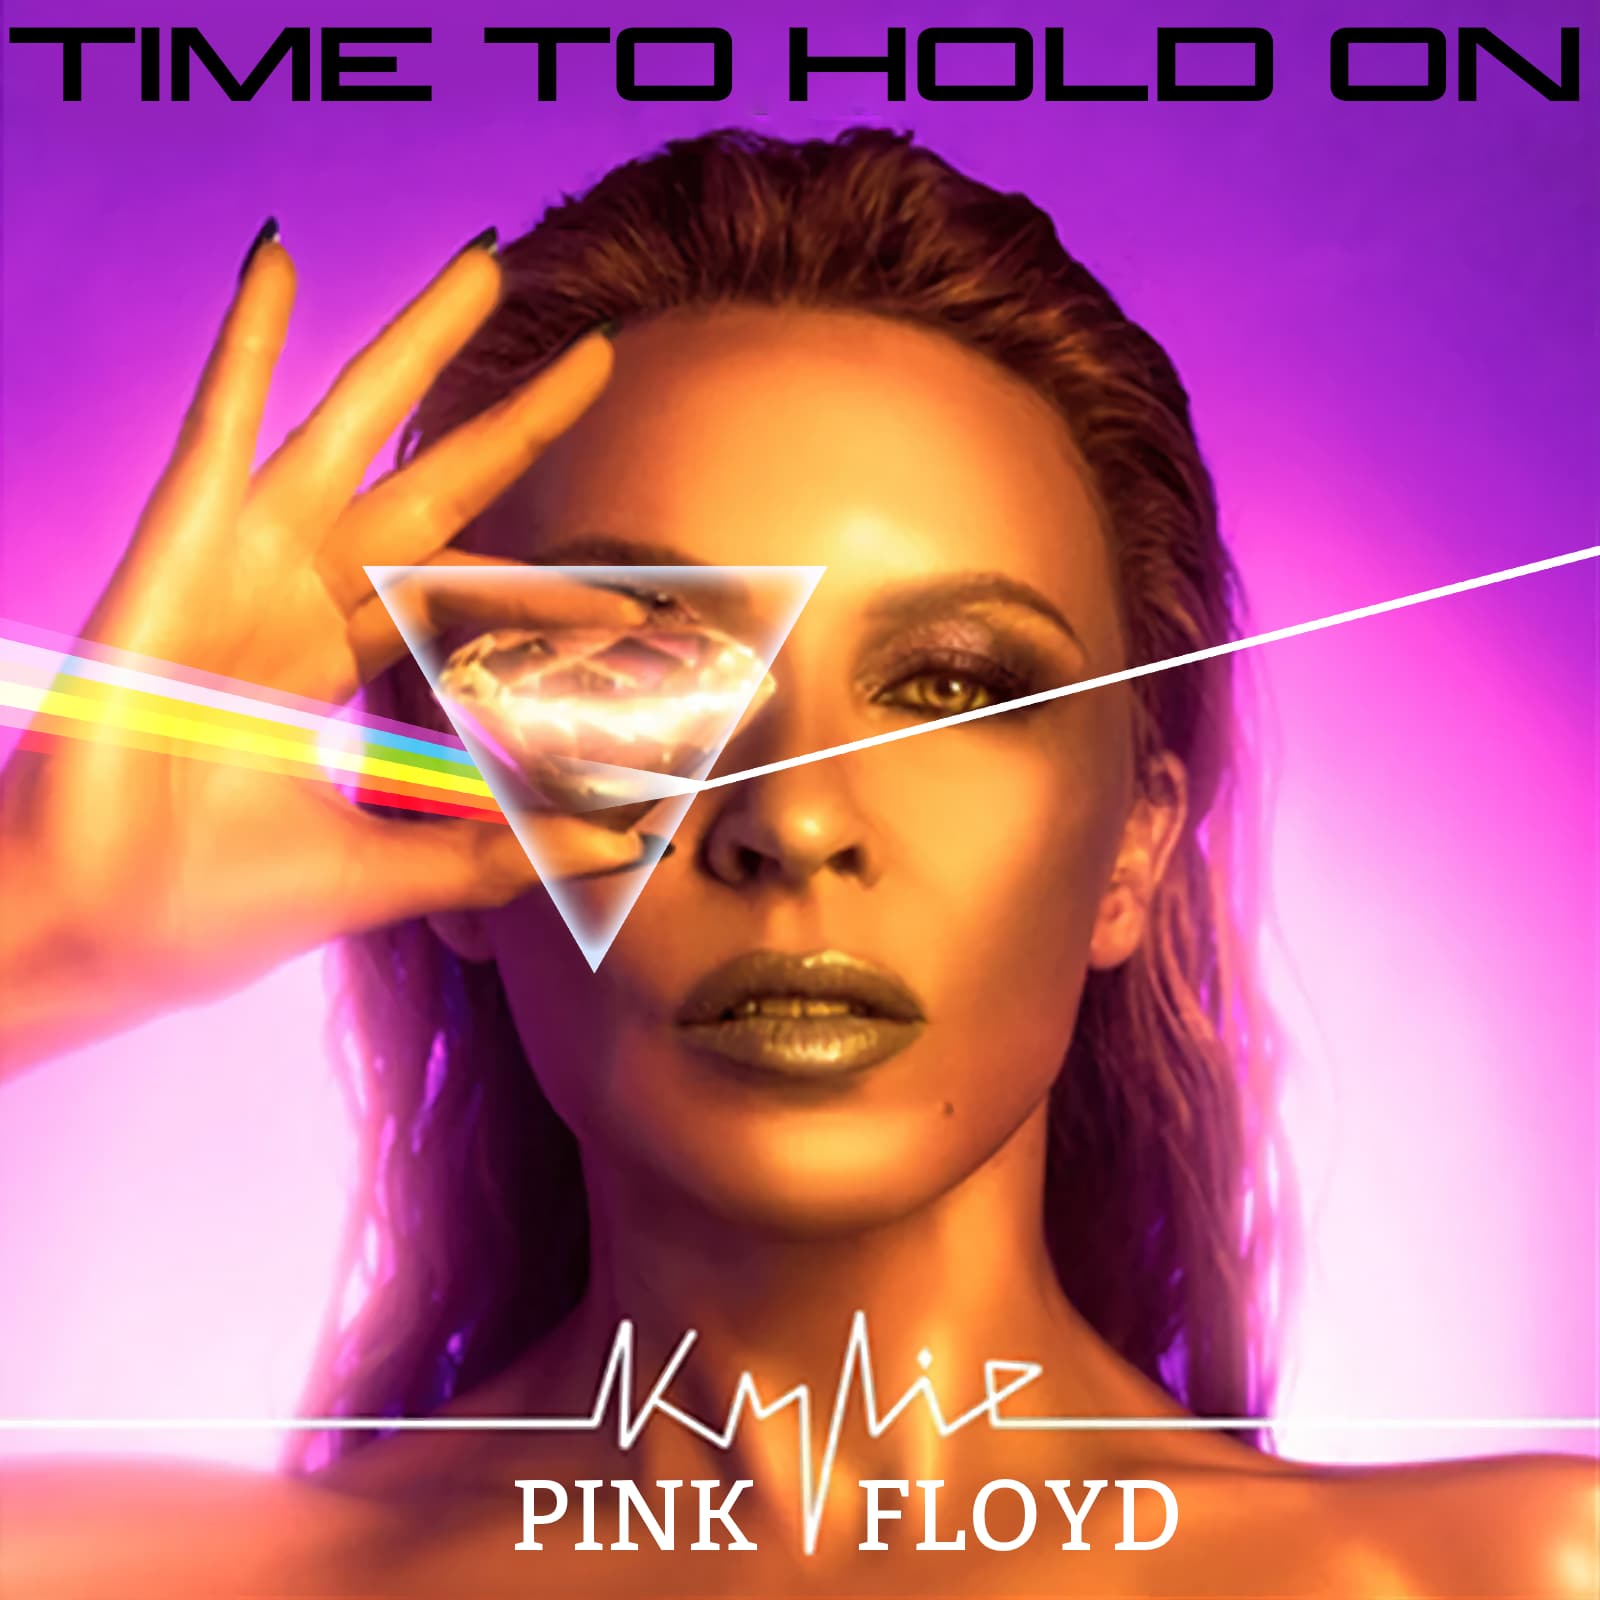 tbc aka Instamatic - Time To Hold On (Kylie Minogue vs Pink Floyd) mashup cover